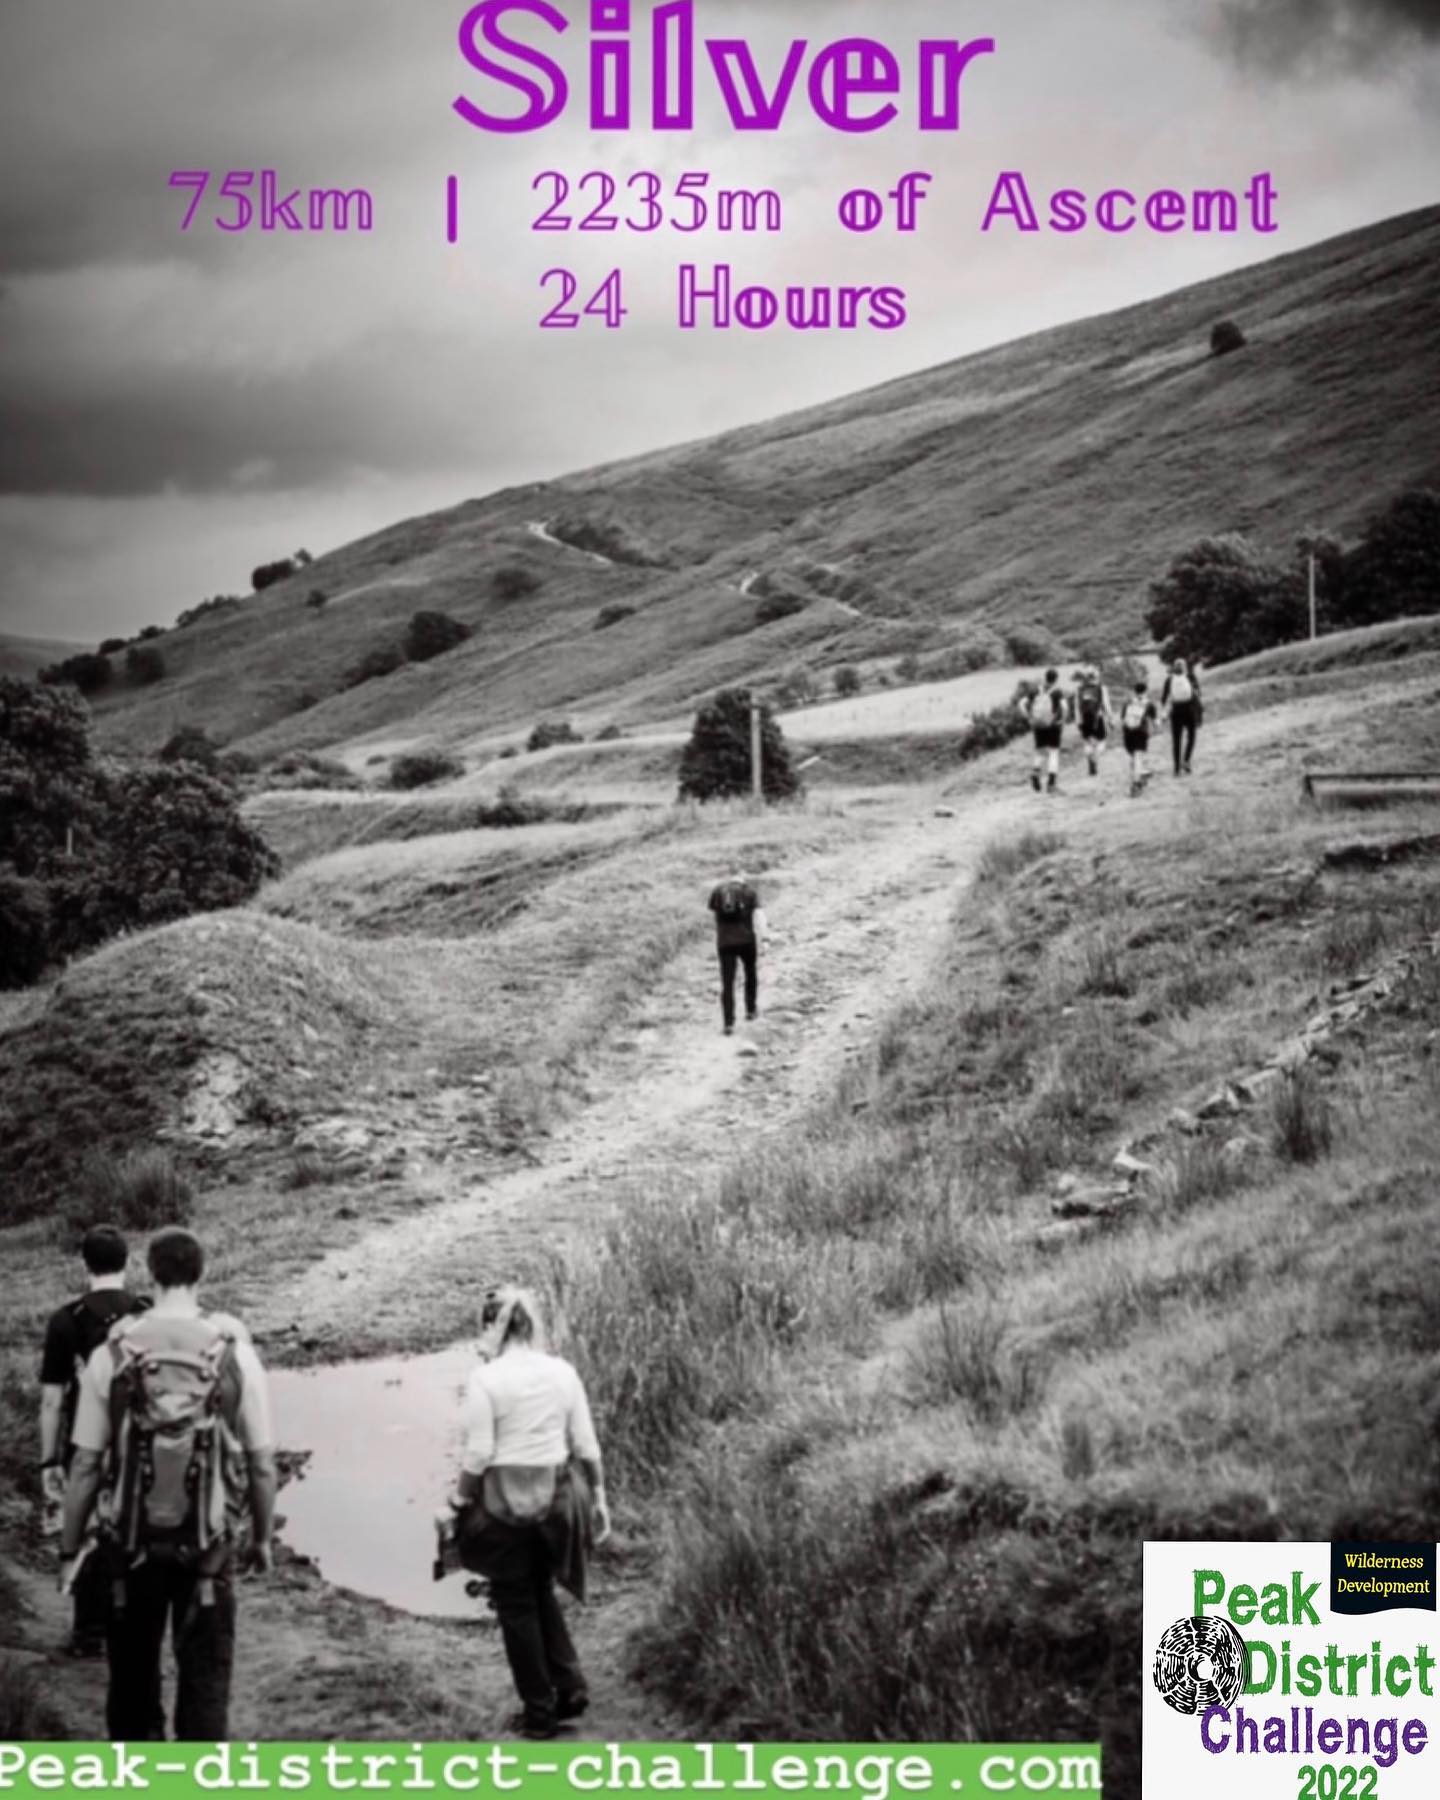 Register now for the Peak-District-Challenge.com 75km Silver Challenge for only £67 in total. 

B...